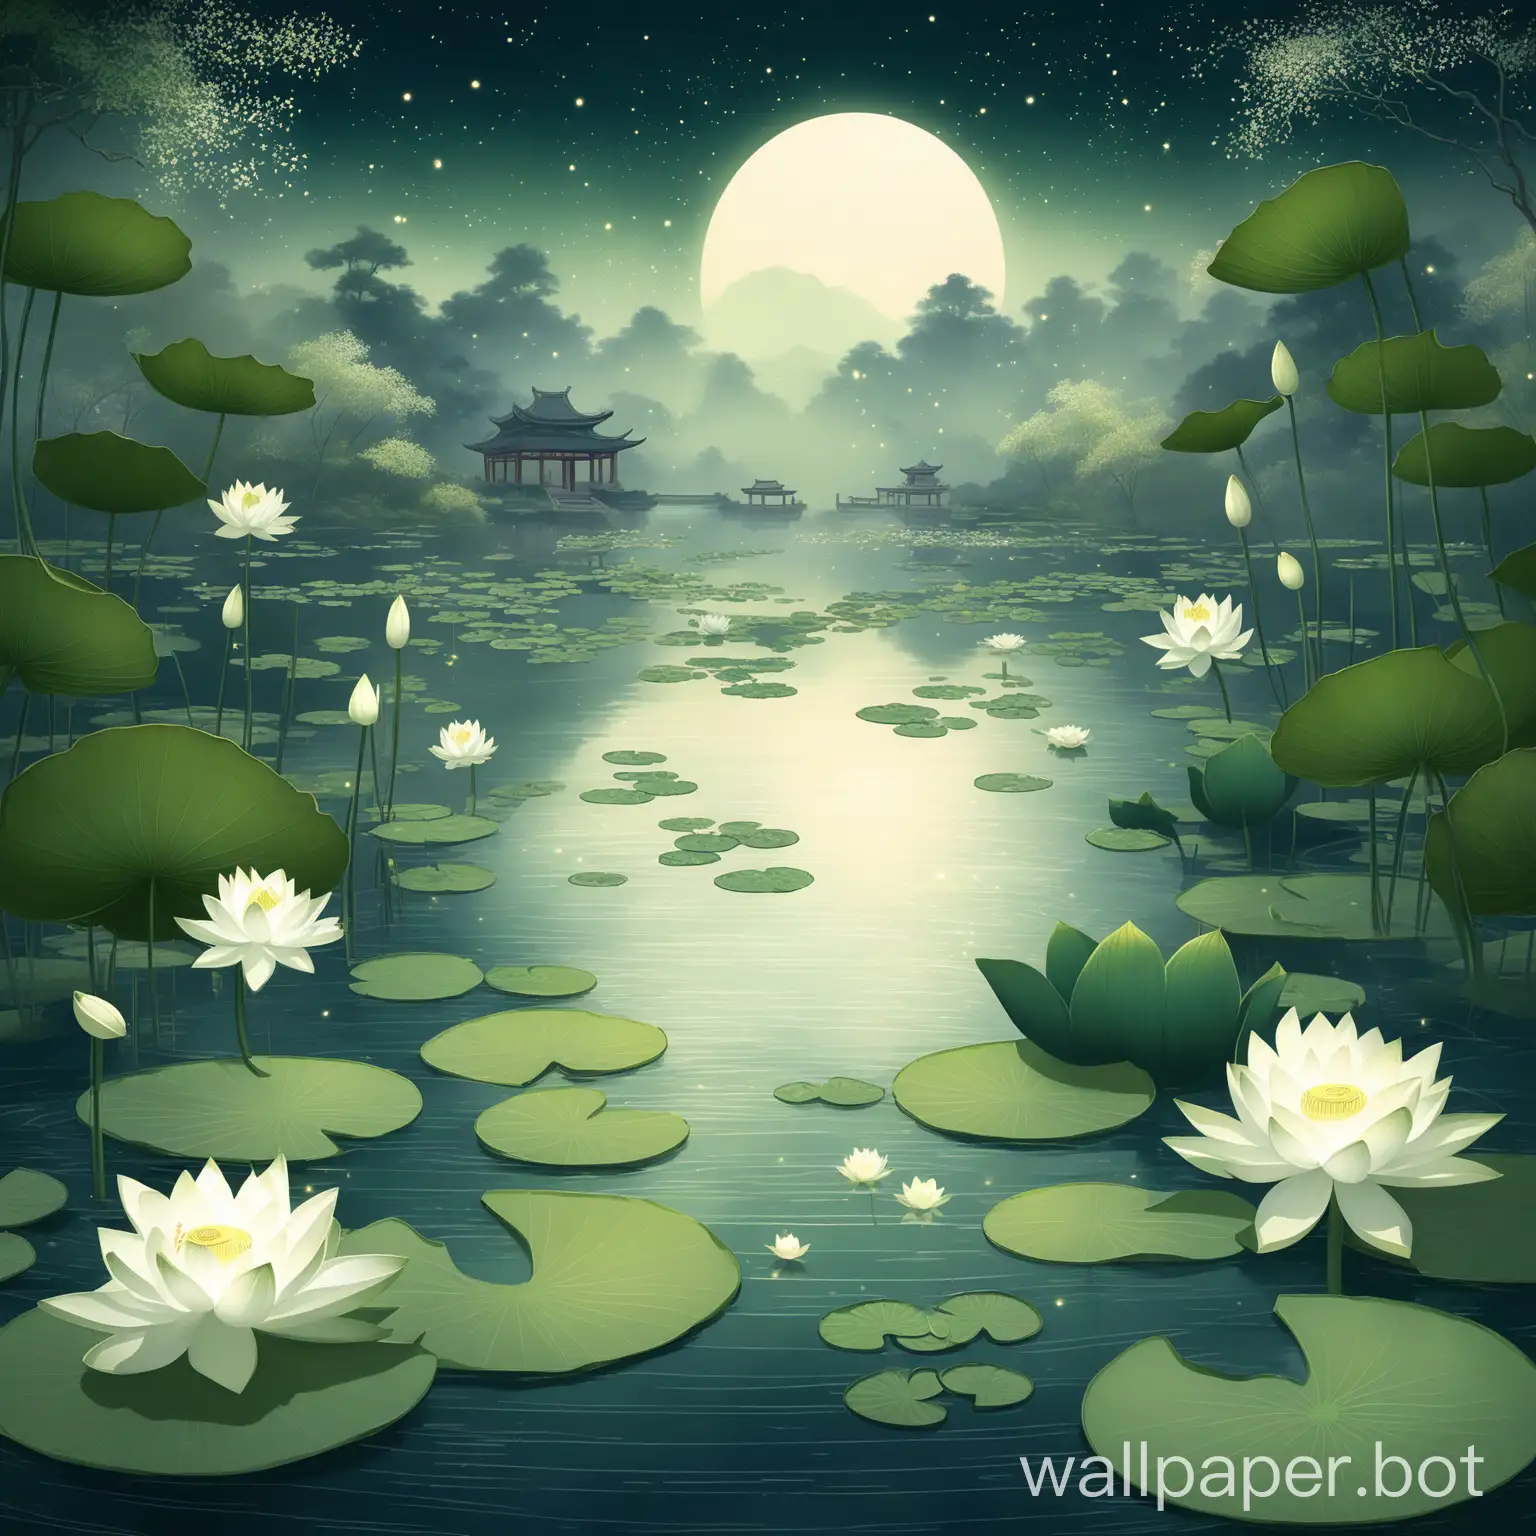 Tranquil-Water-Garden-Wallpaper-Lily-Pads-and-Lotus-Flowers-in-Traditional-Asian-Art-Style